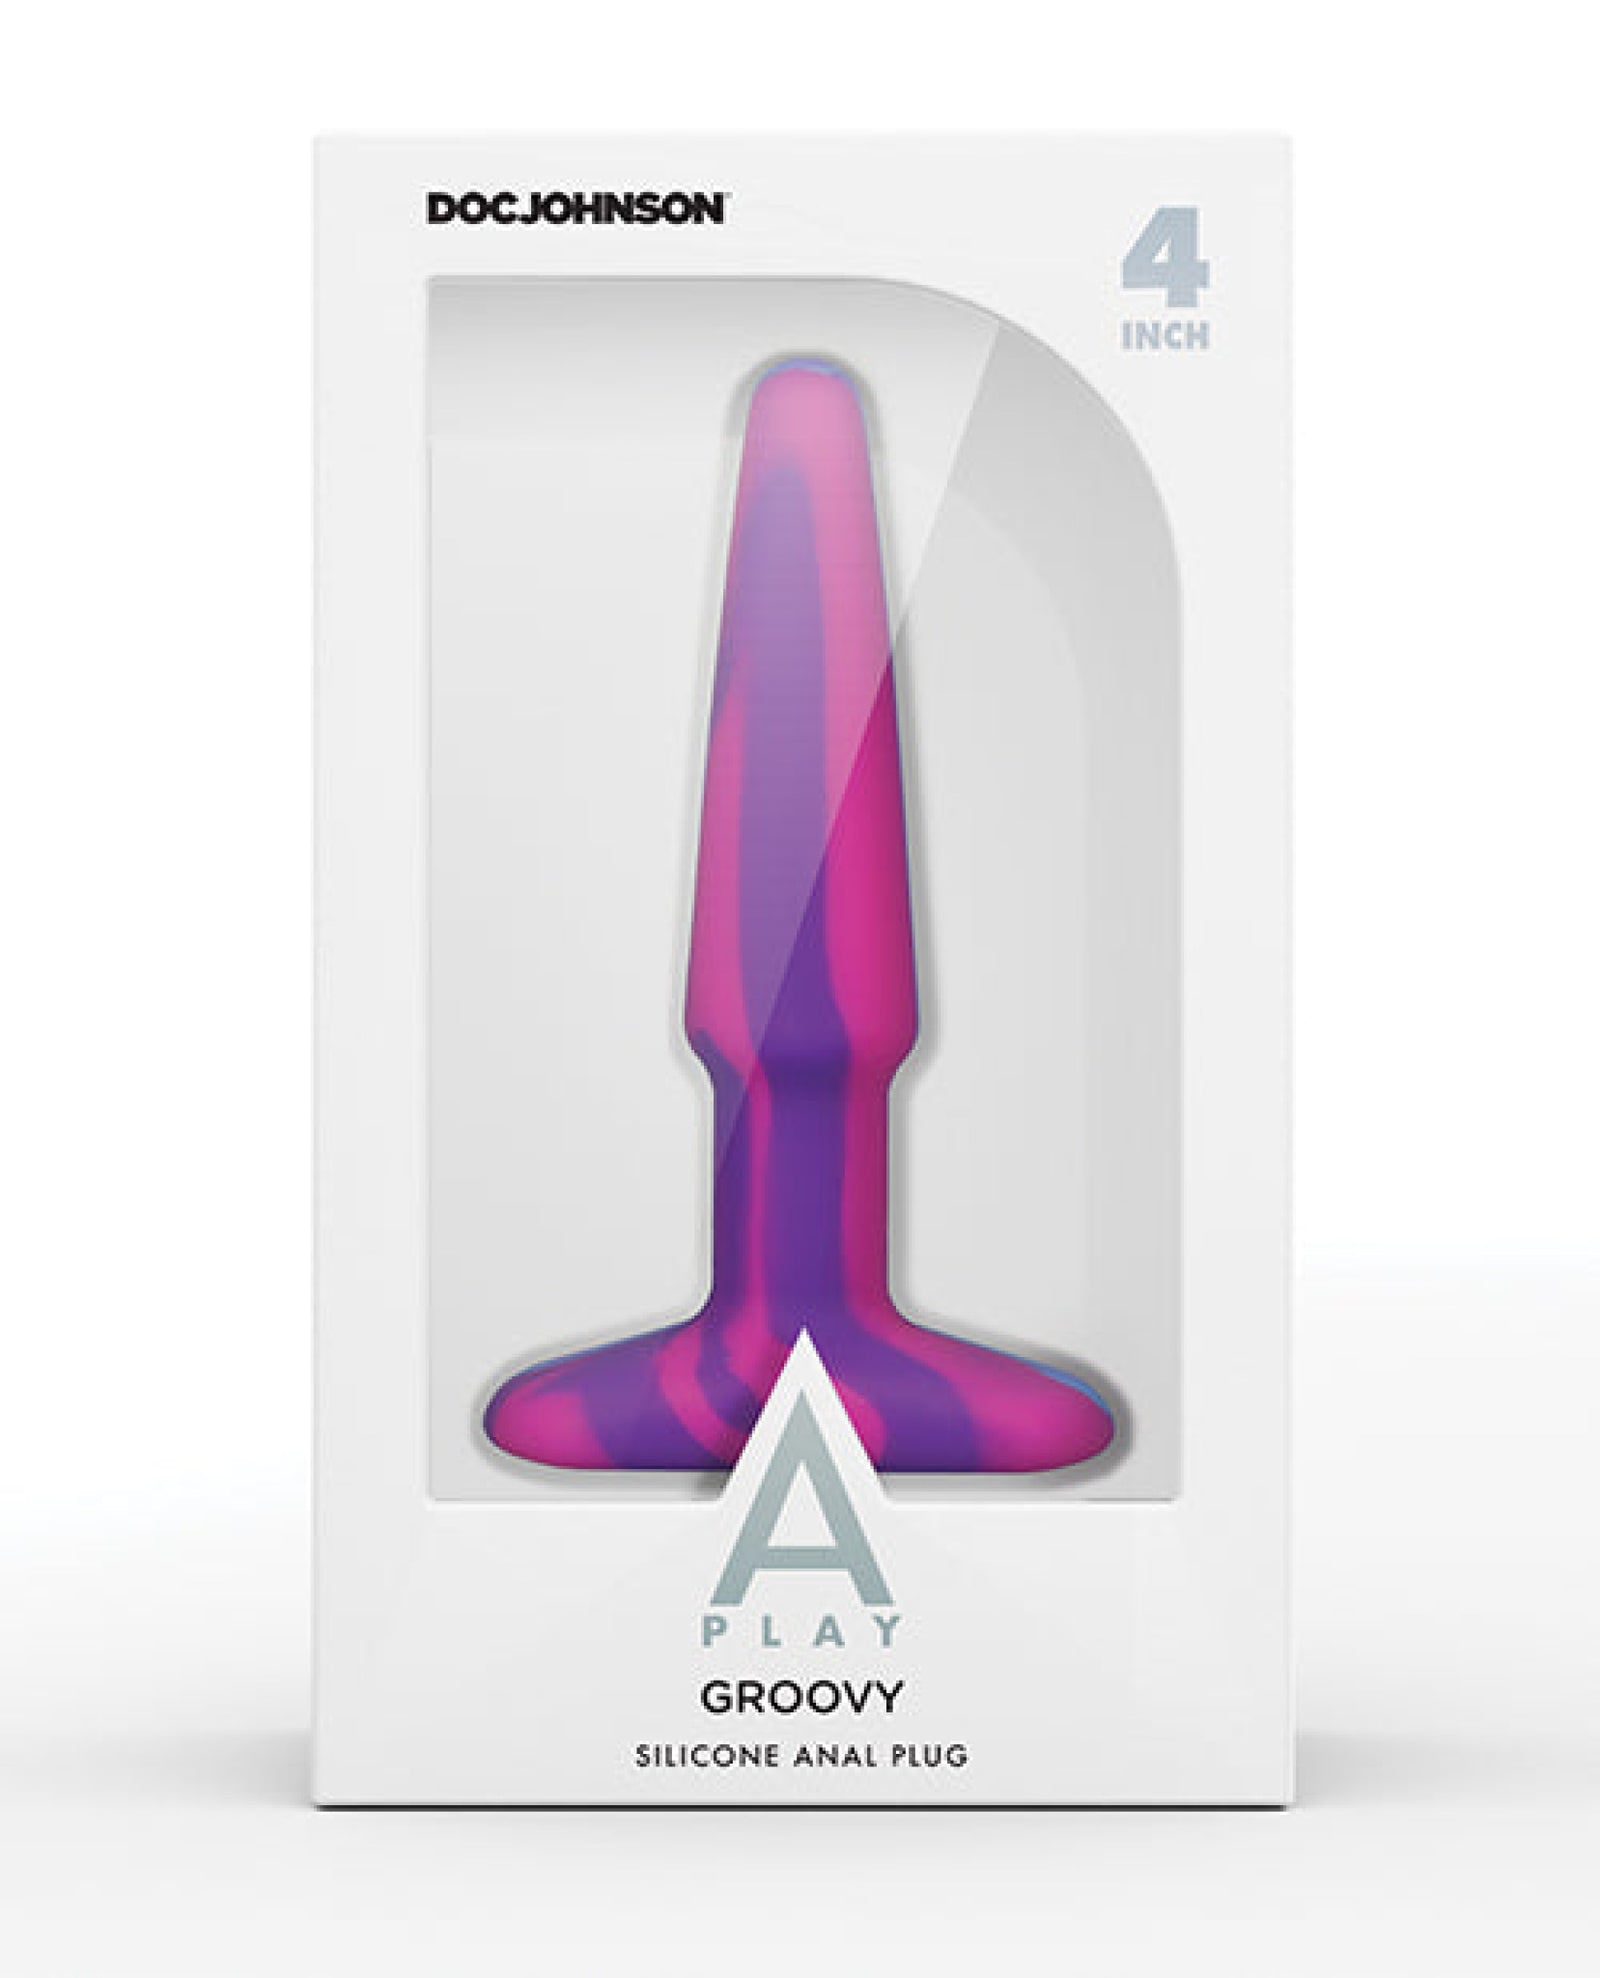 A Play 4" Groovy Silicone Anal Plug - Multicolor-pink Doc Johnson